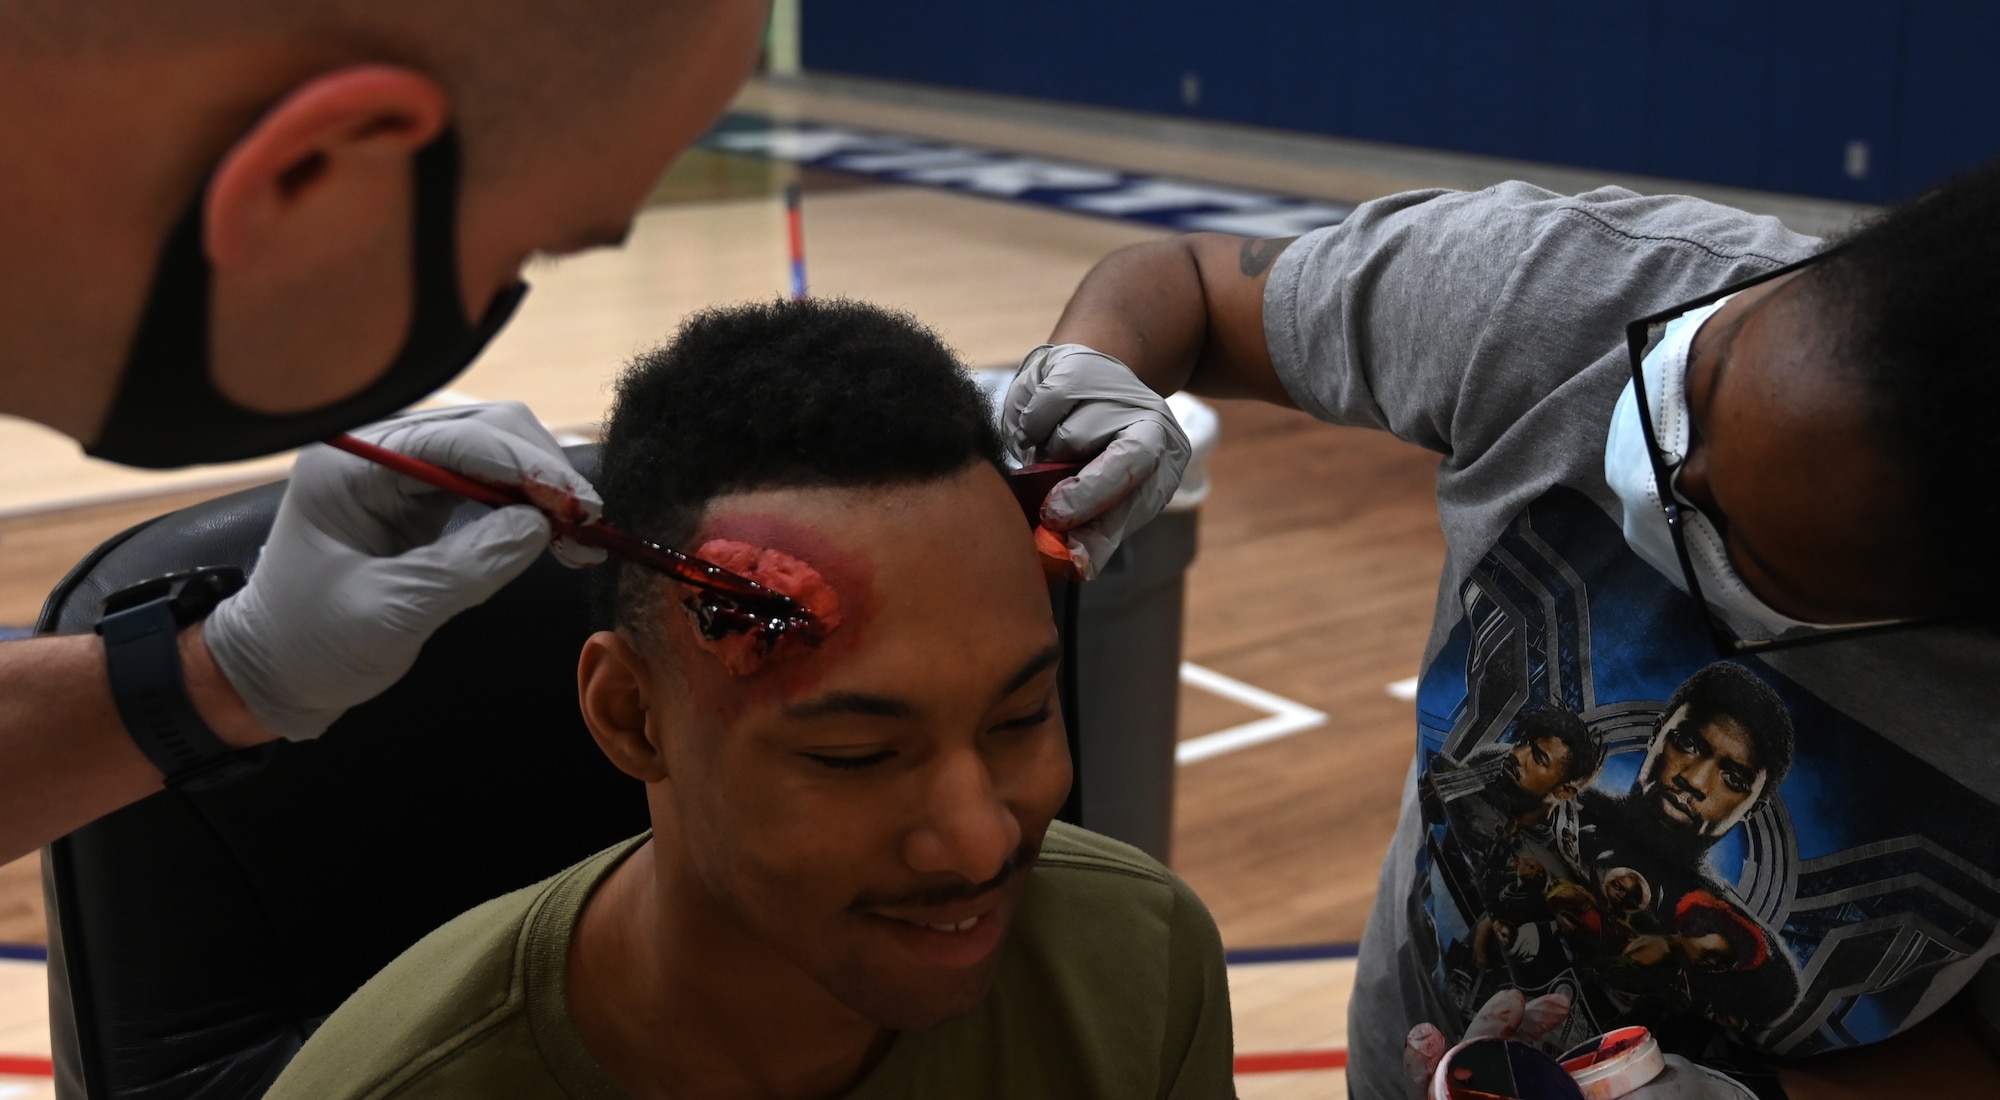 Makeup artists apply blood and tissue to role player